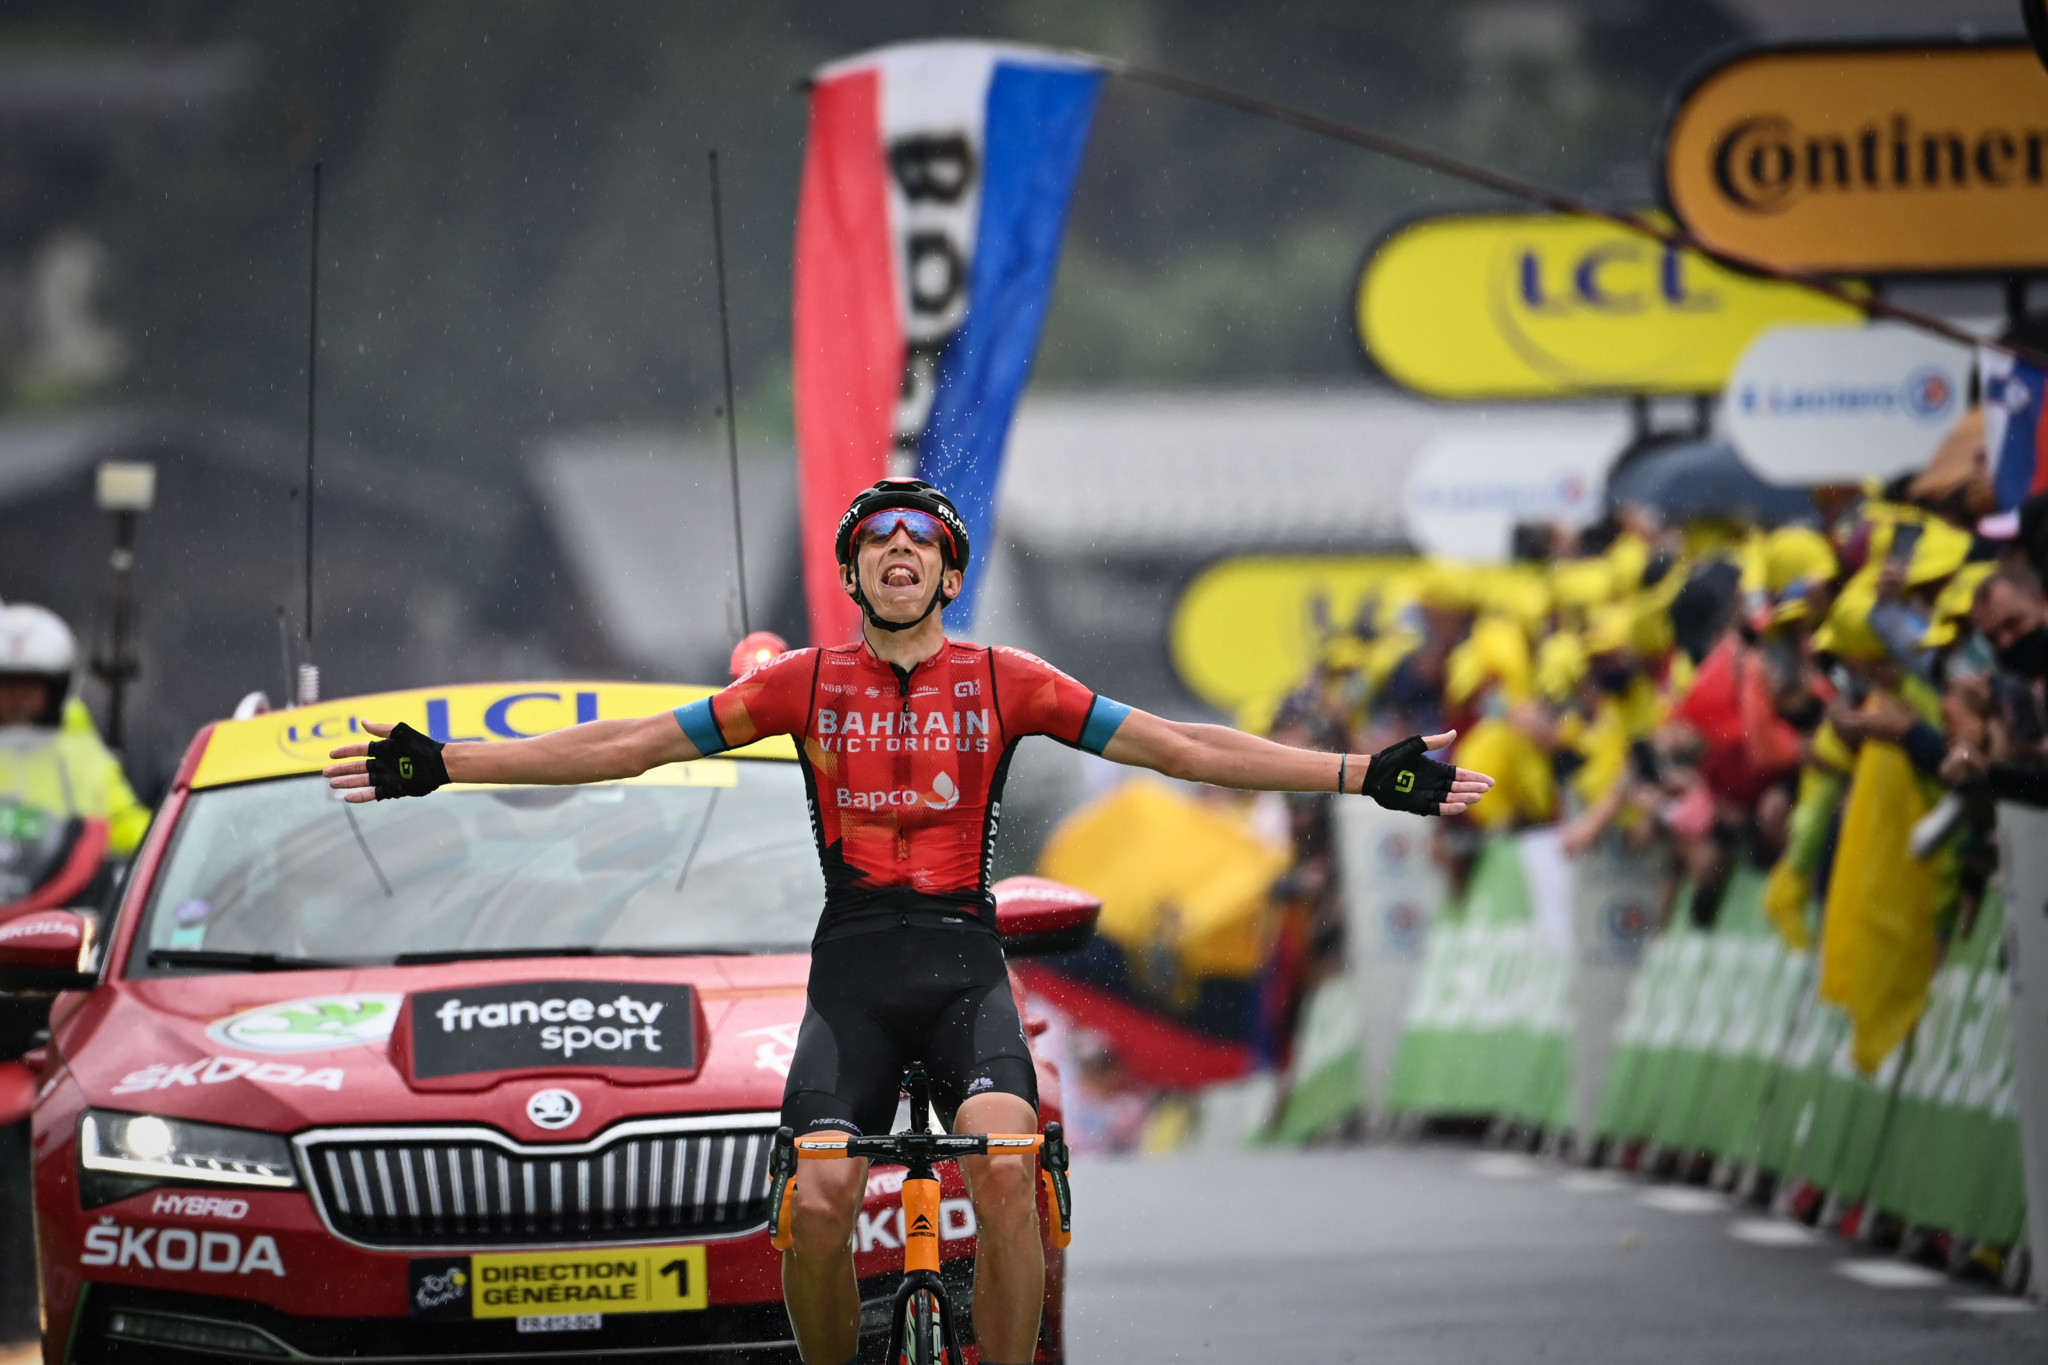 Dylan Teuns was among two stage winners for Bahrain Victorious as they claimed the team classification crown at the 2021 Tour de France ©Getty Images